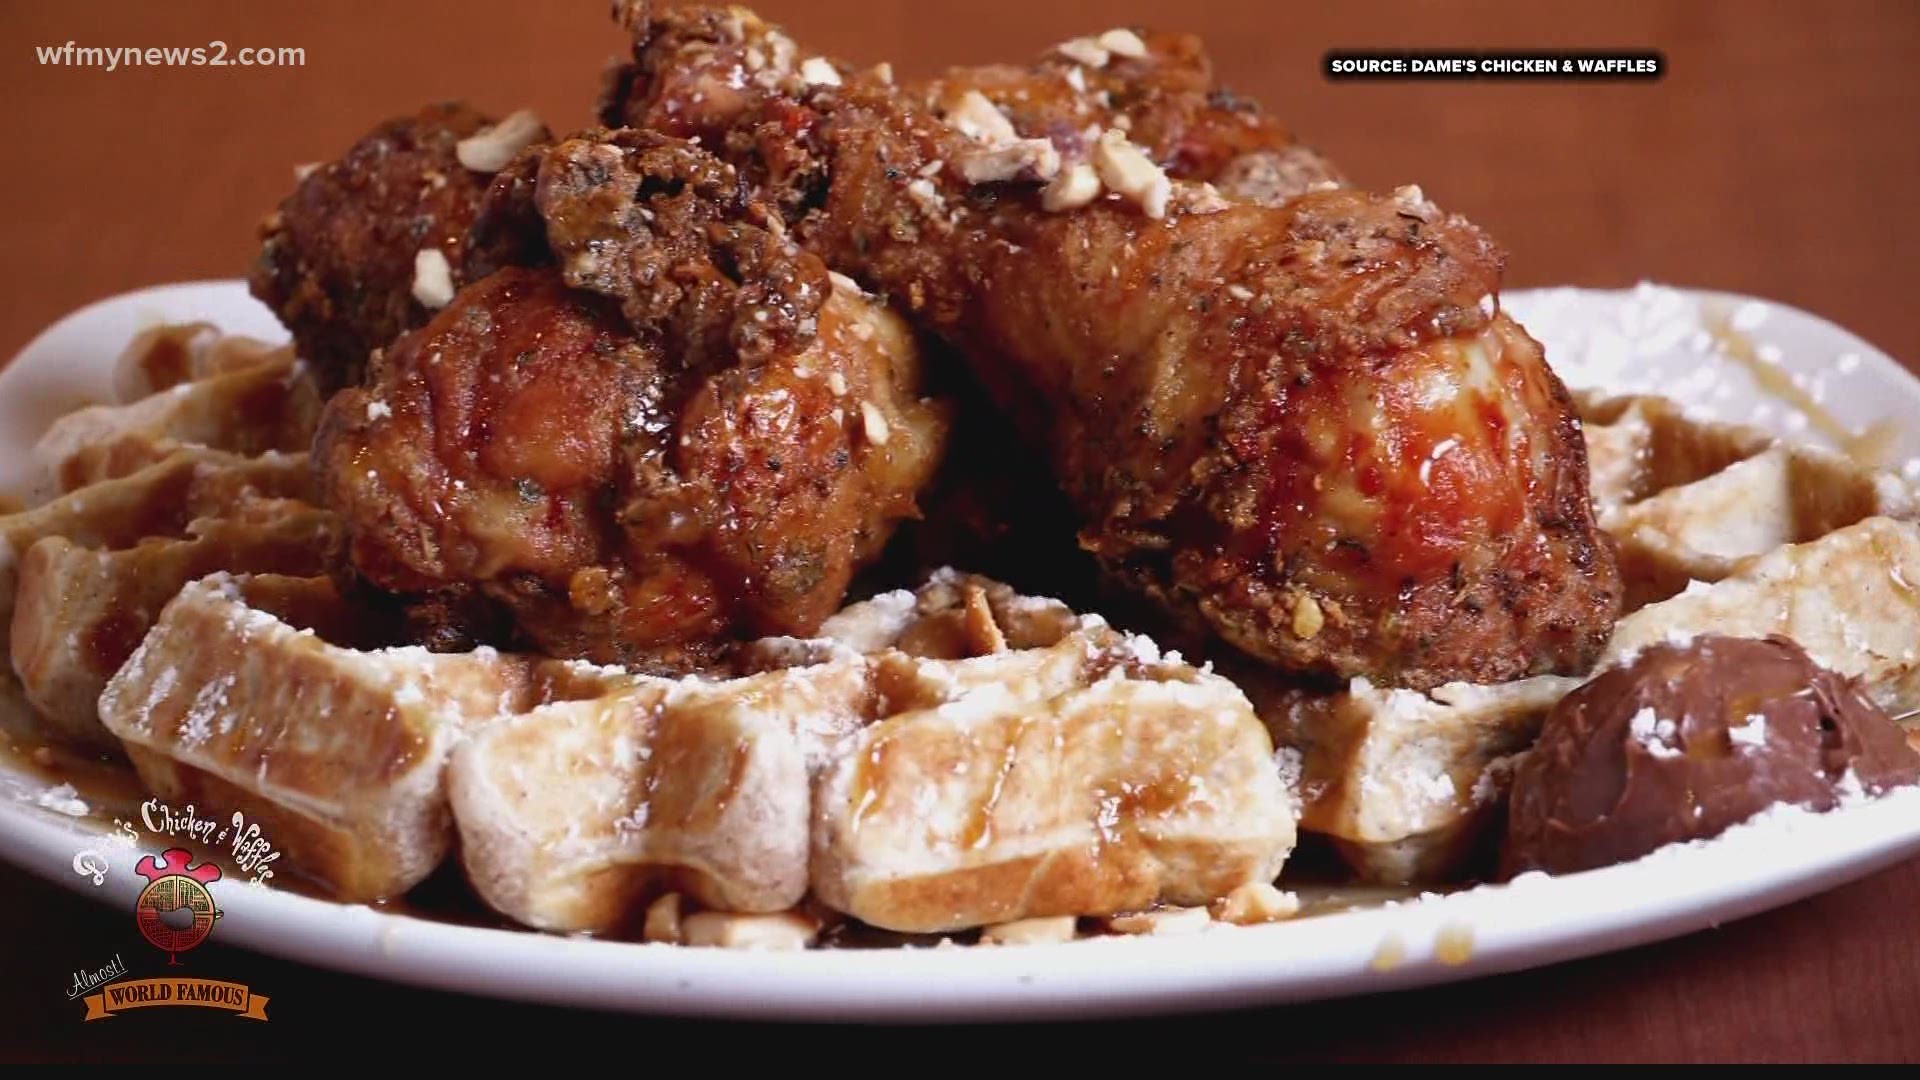 Dame's Chicken and Waffles is a Black-owned southern restaurant in Greensboro.